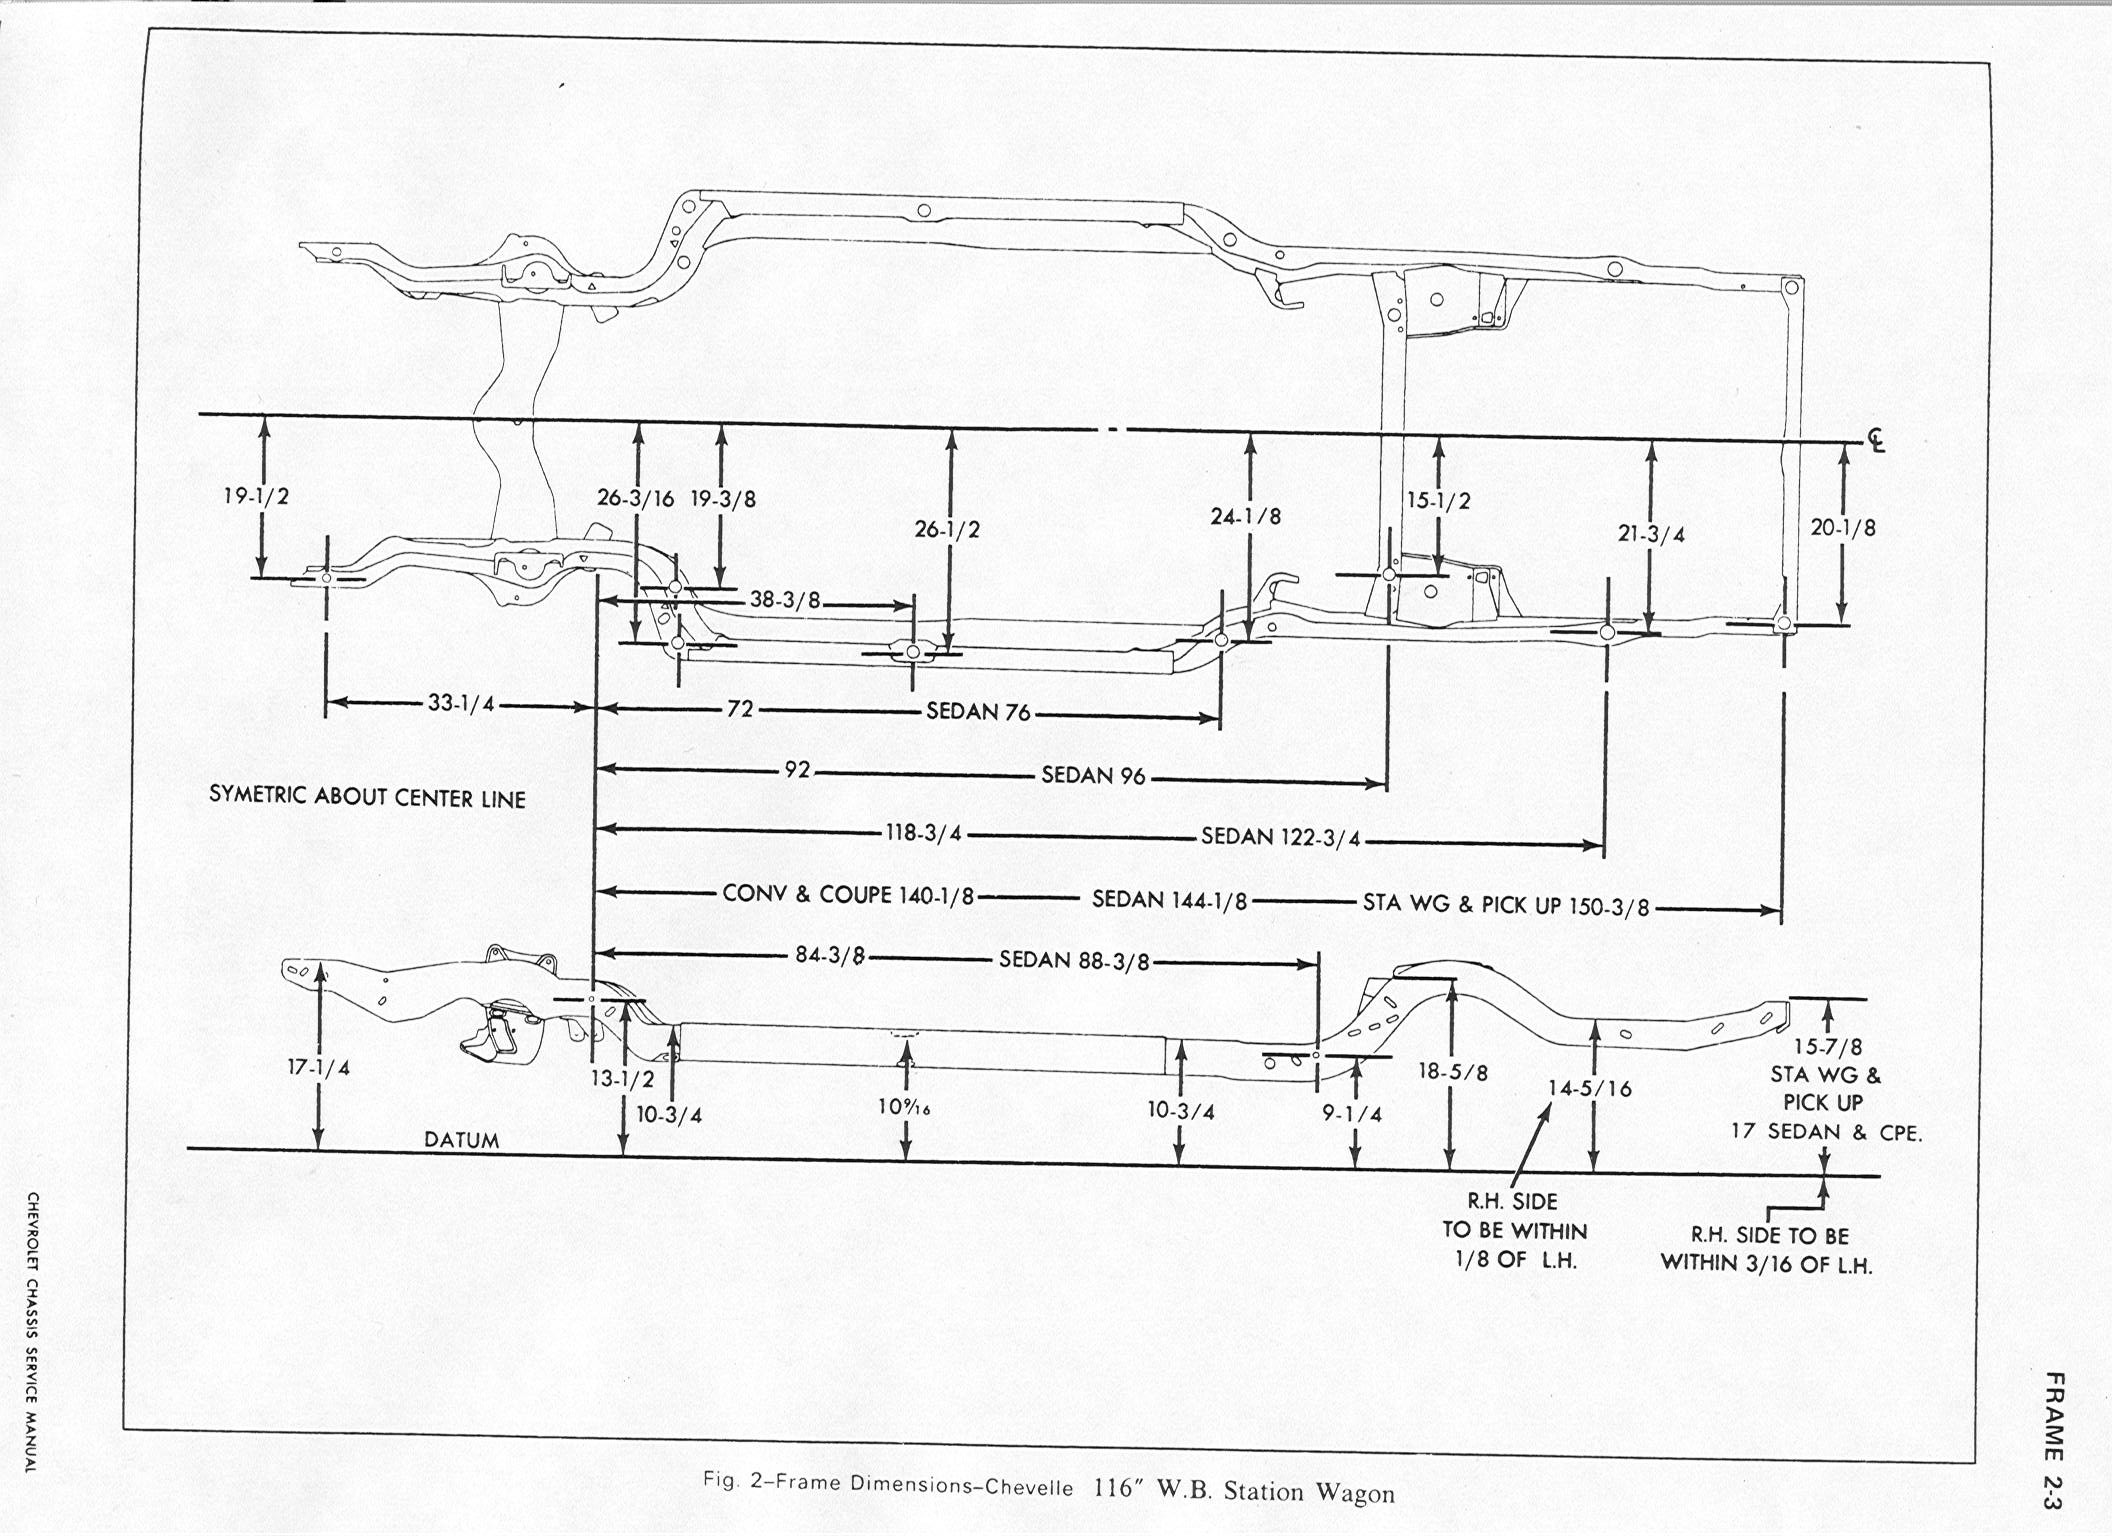 1968 Chevelle Frame Drawing - Chevelle Tech door lock wiring diagram for 1998 honda civic 